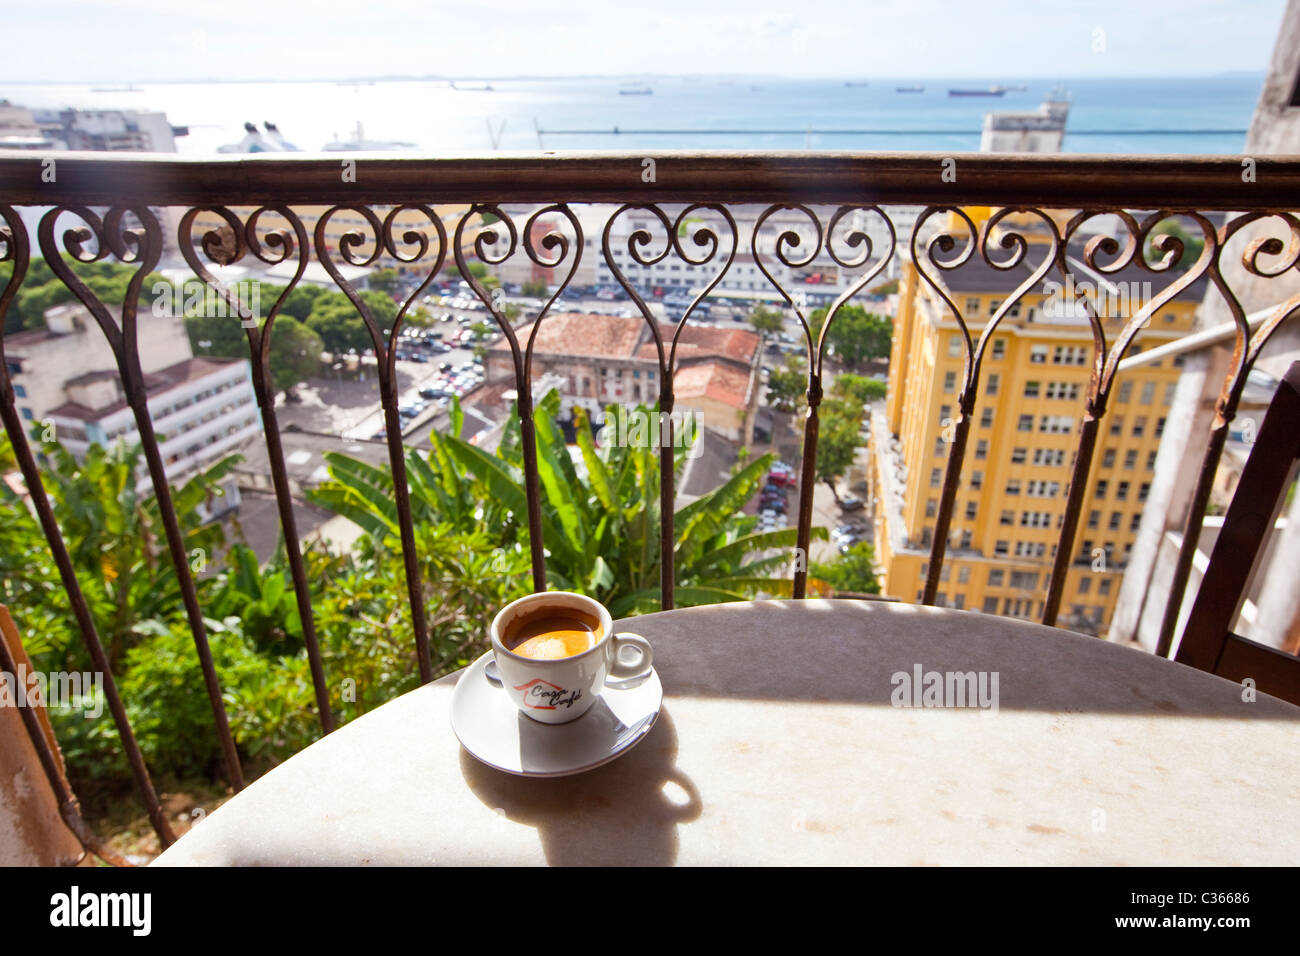 Espresso in the old town, Salvador, Brazil Stock Photo